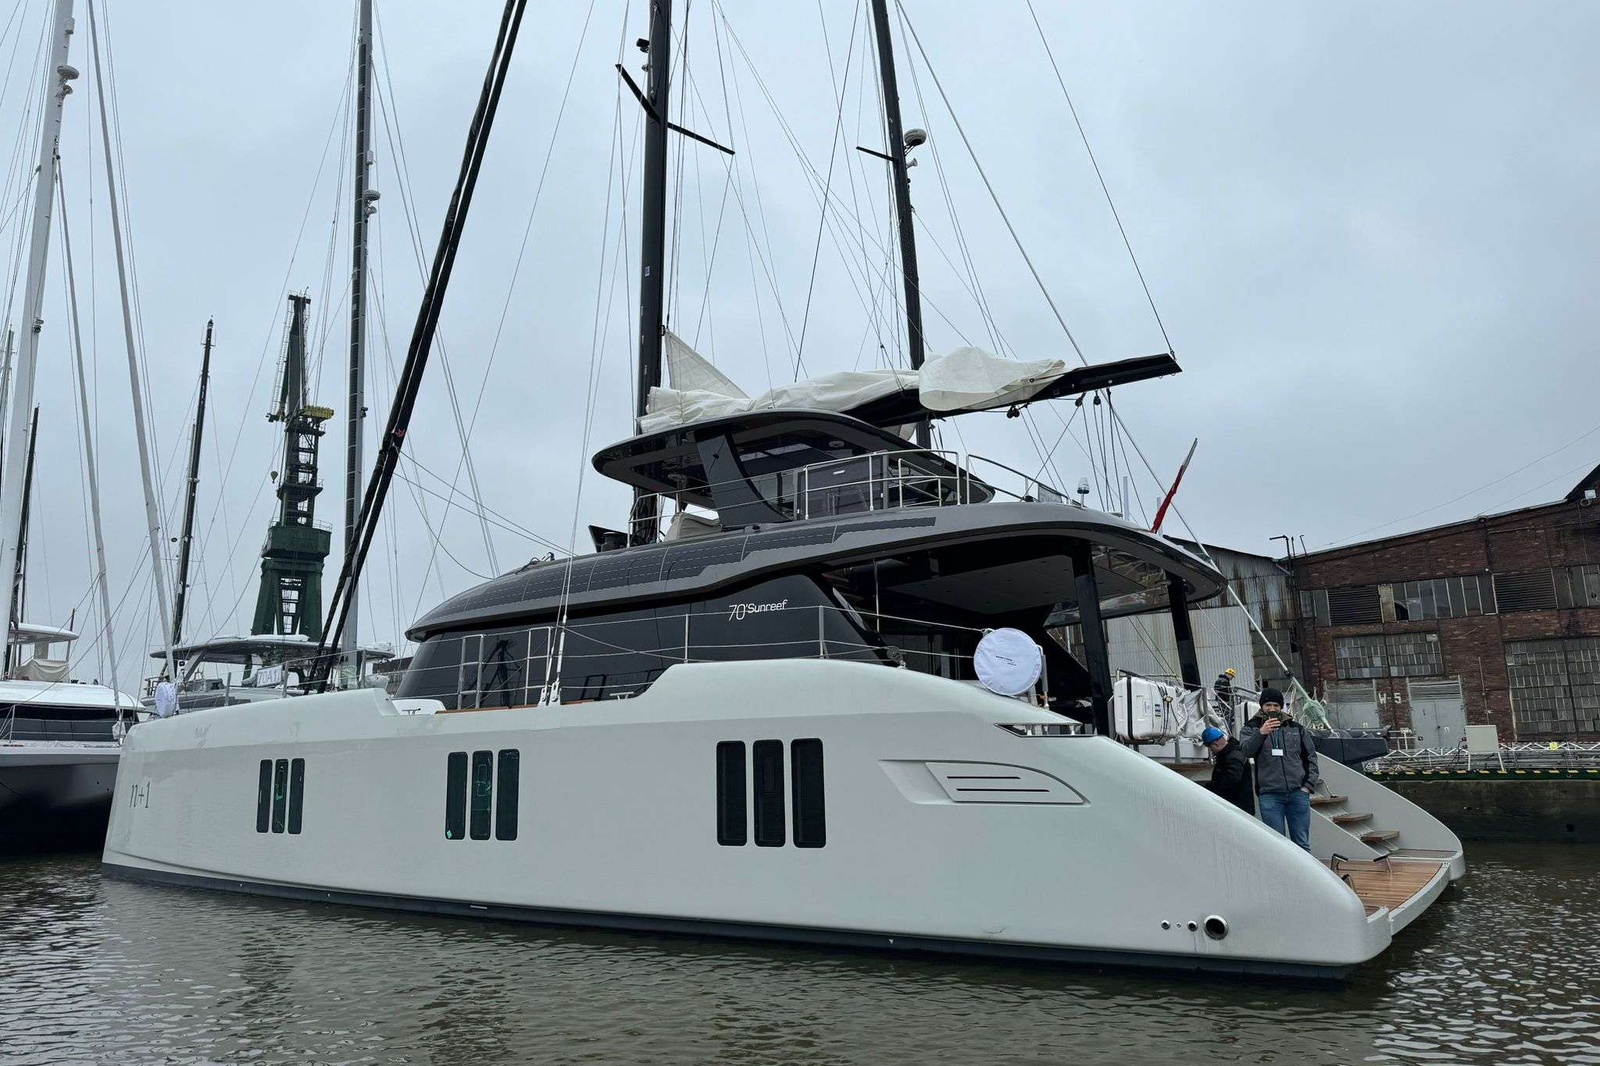 'n' which is the algebraic representation of 'the number' of boats you own. '+1' represents one that you want to buy.  n+1 is the steady state of all people who love boats.  With her outstanding living spaces, the Sunreef 70 